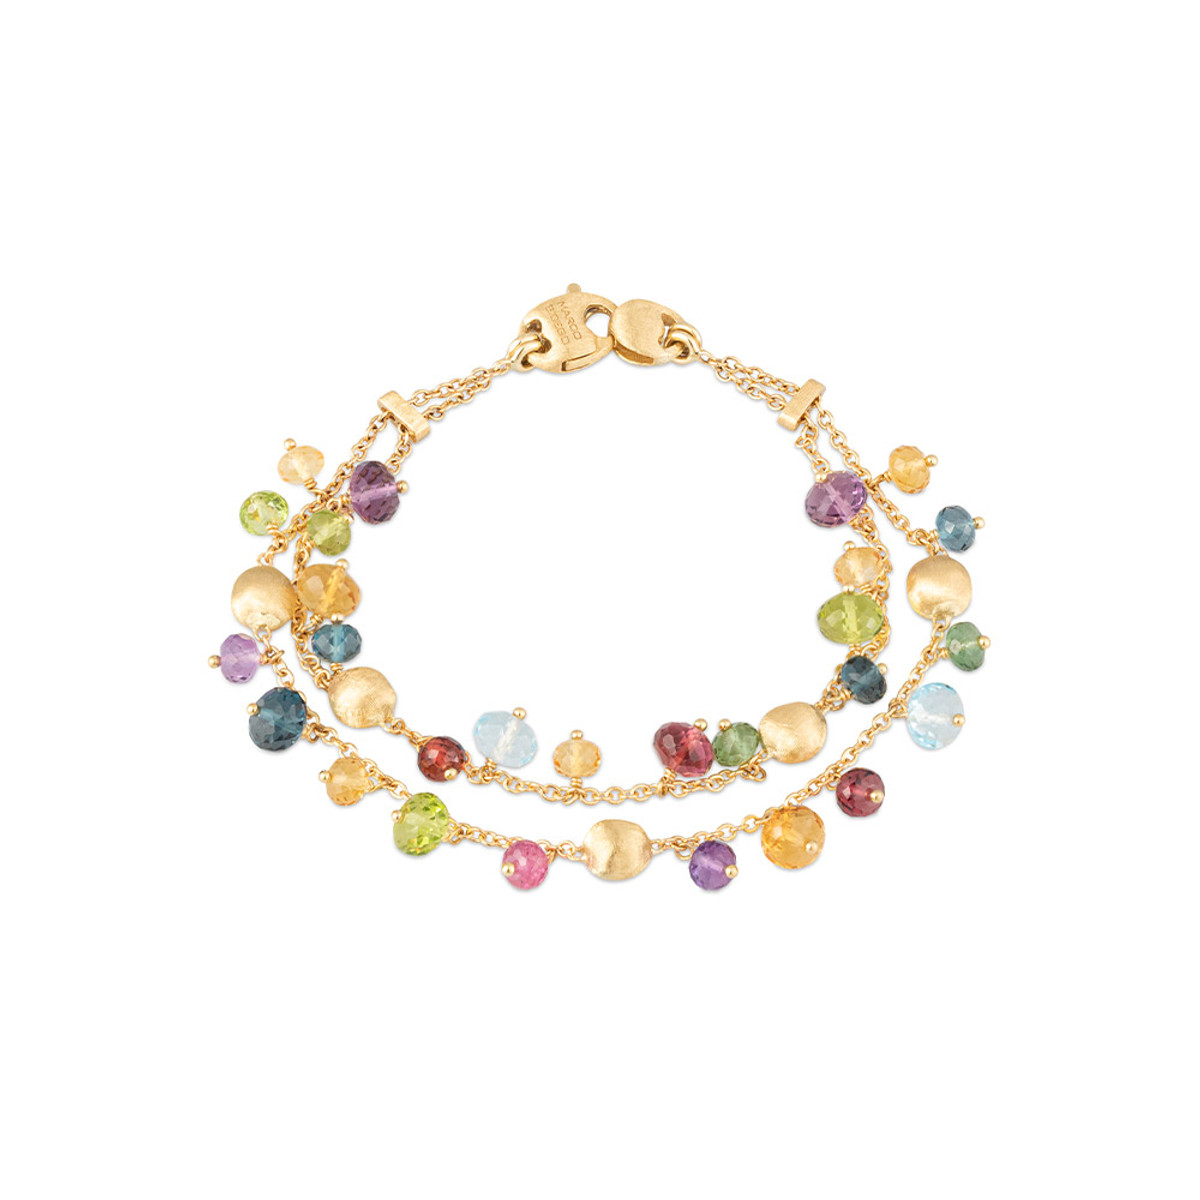 Marco Bicego Africa Collection 18K Yellow Gold 2-Strand Mixed Gemstone Bracelet-61183 Product Image